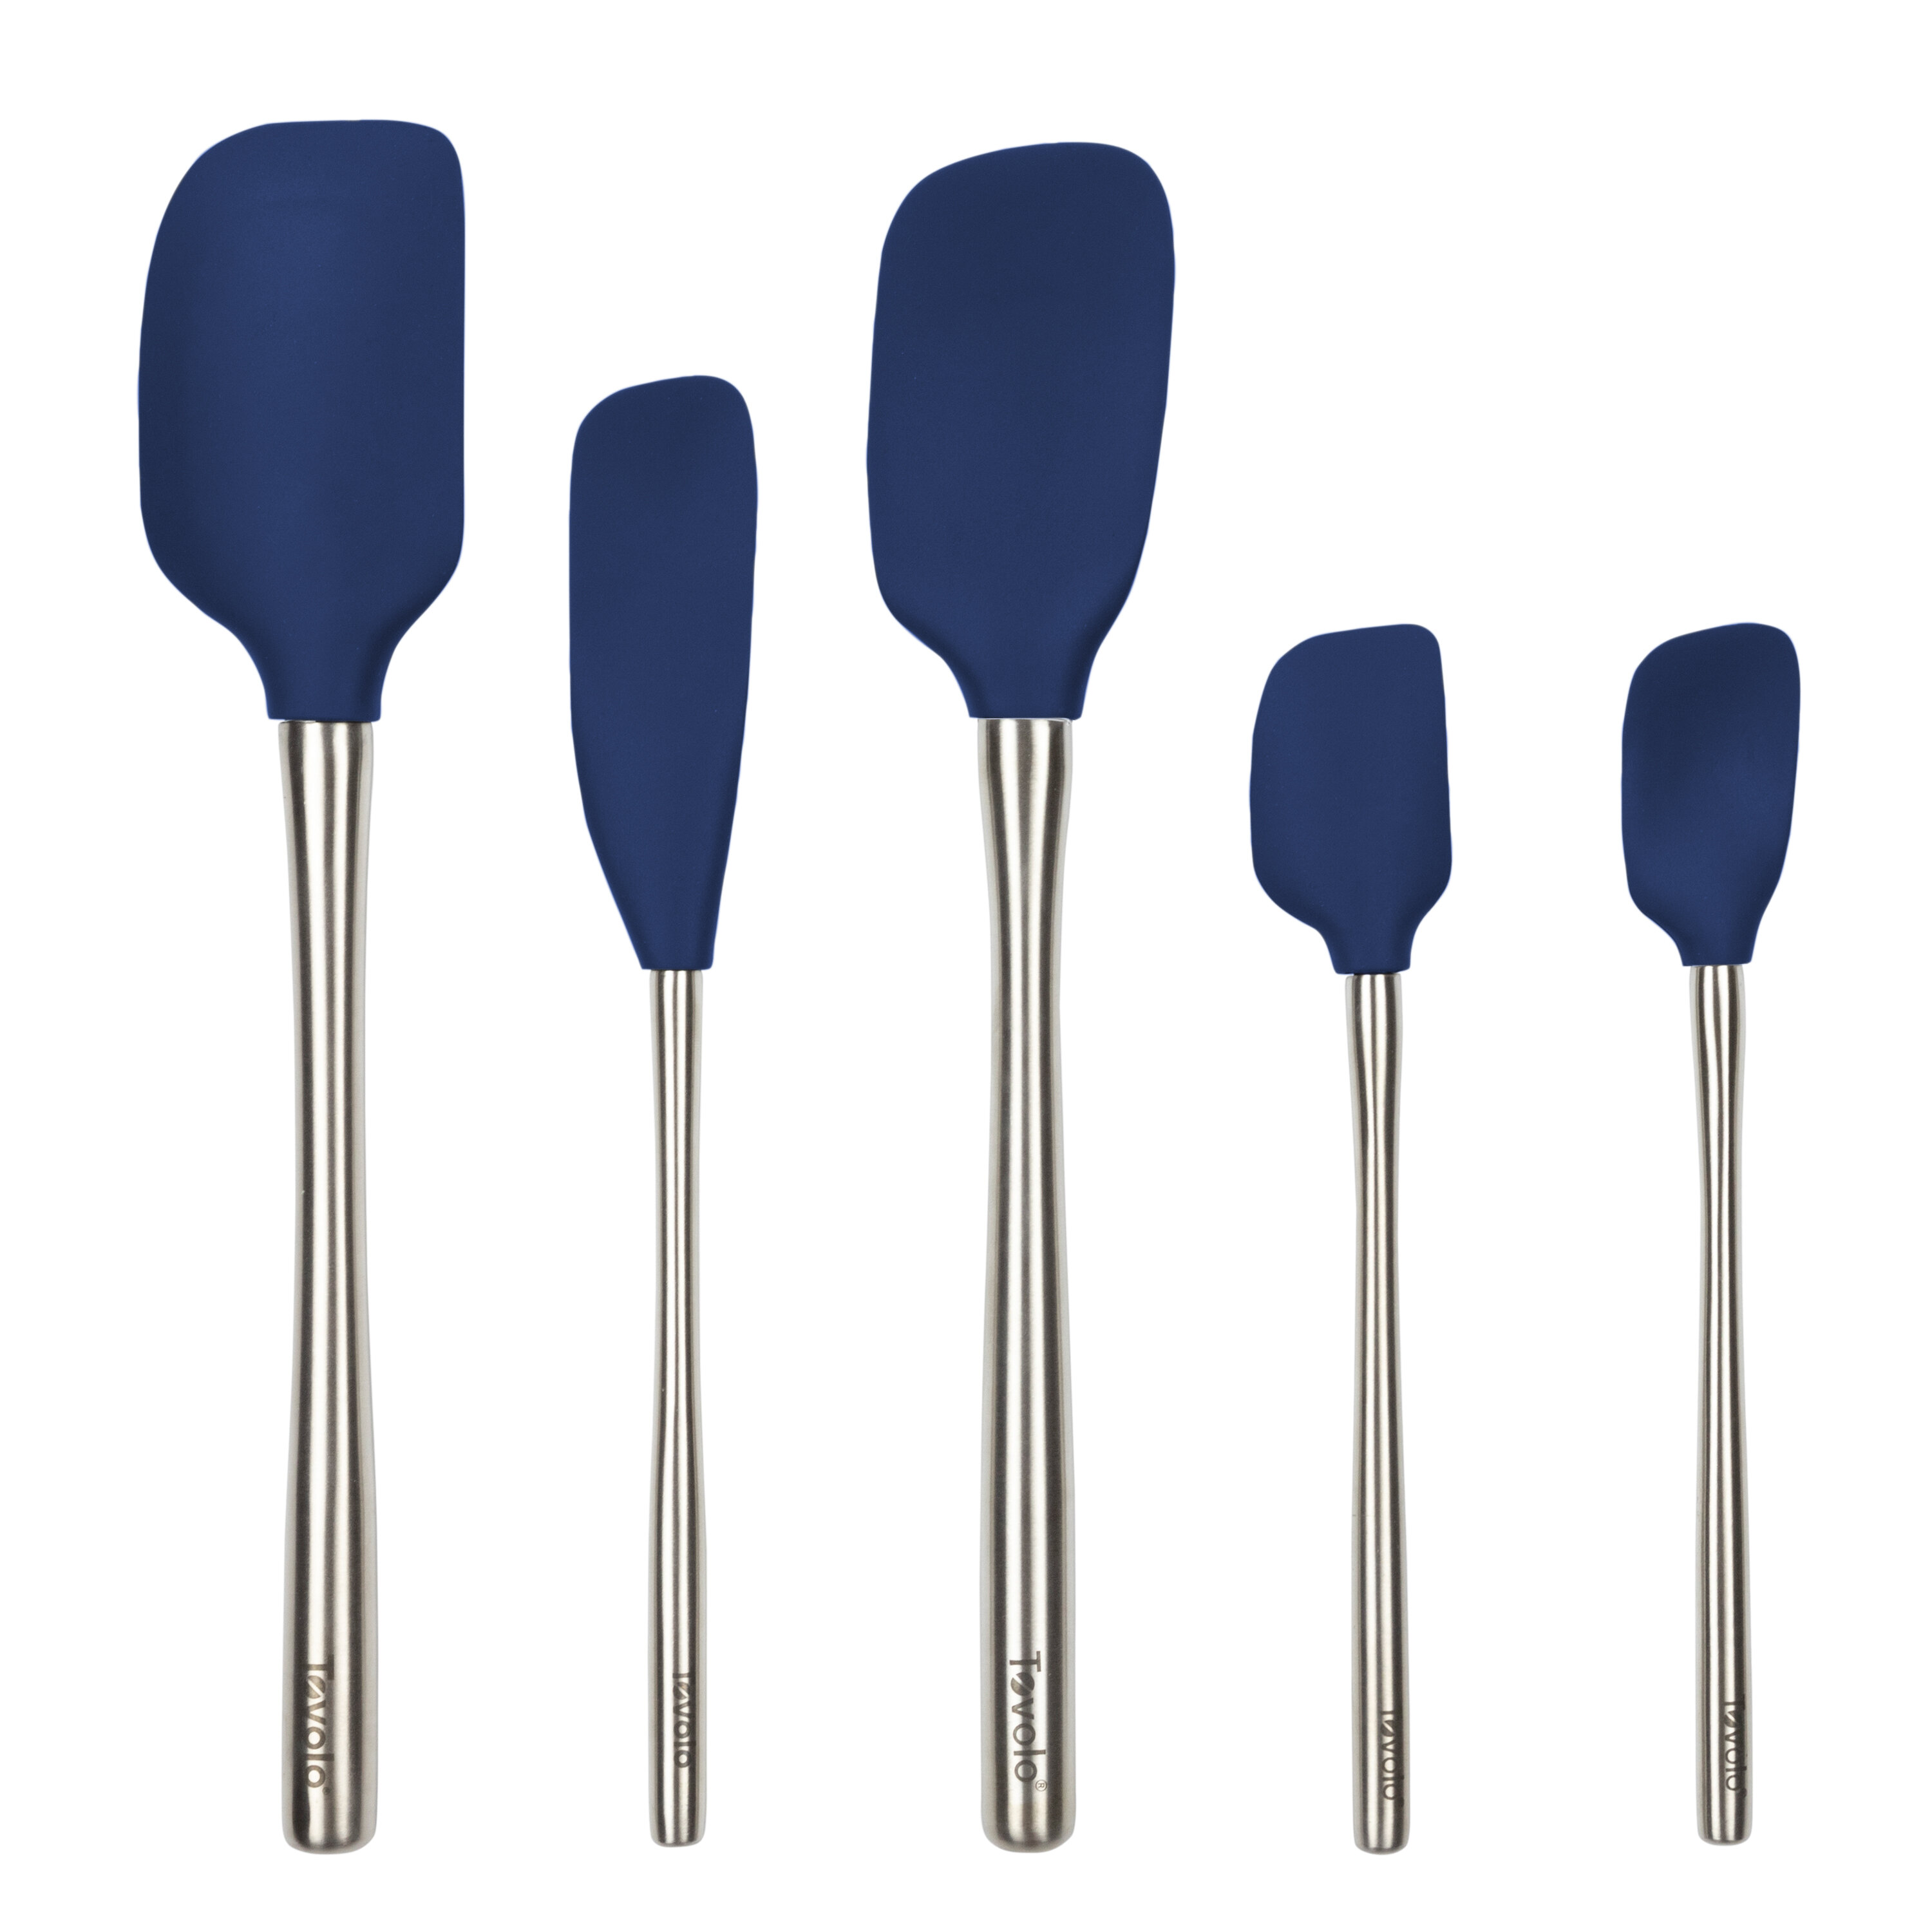 Tools: 5 Things You Didn't Know About Spatulas